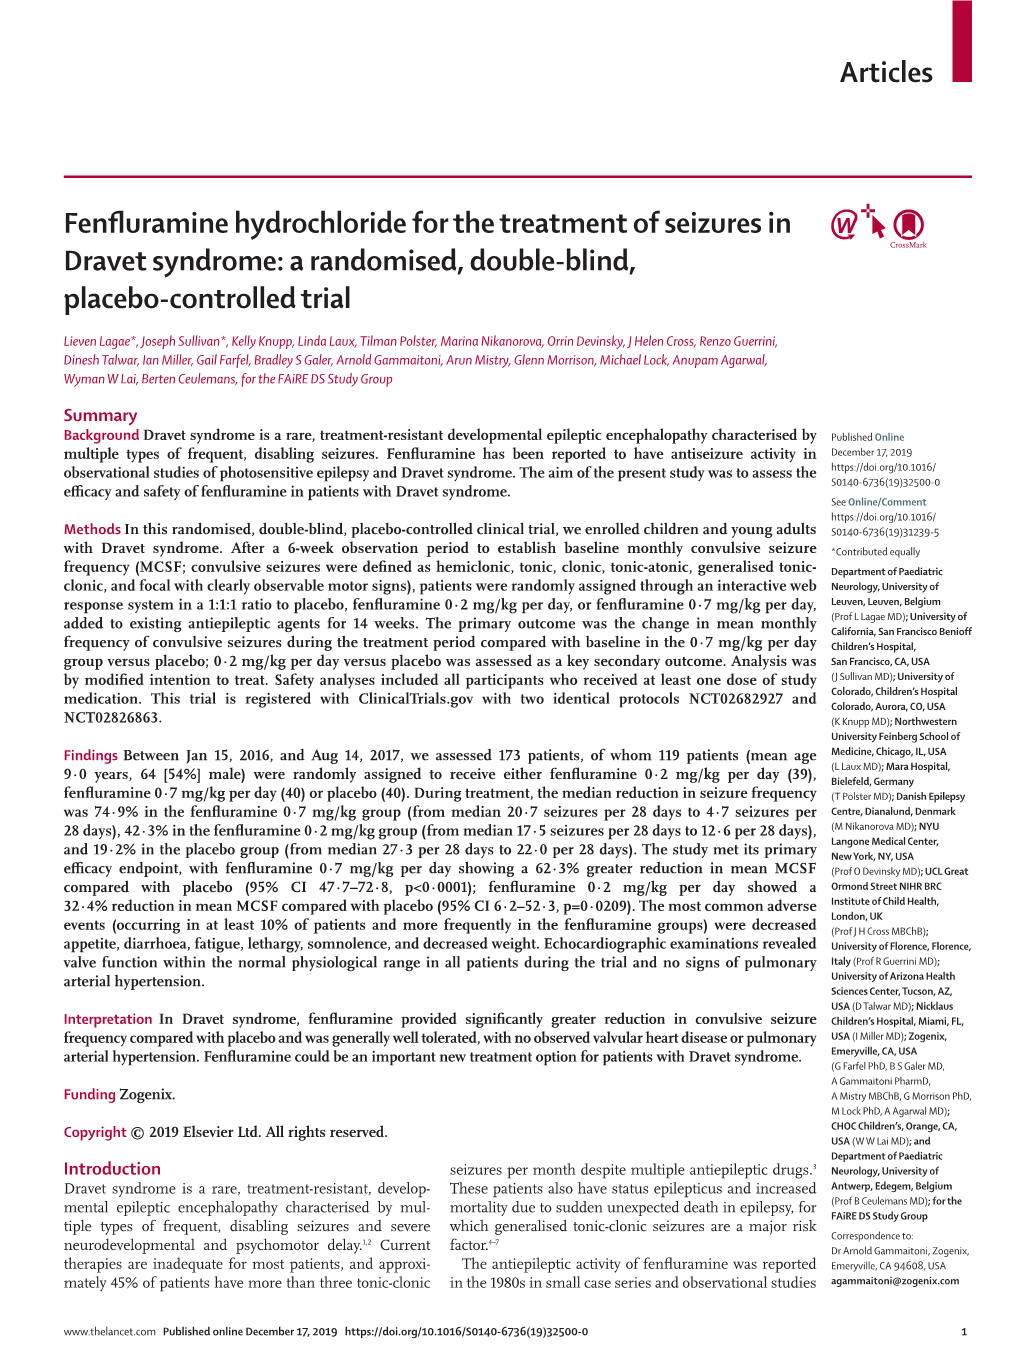 Fenfluramine Hydrochloride for the Treatment of Seizures in Dravet Syndrome: a Randomised, Double-Blind, Placebo-Controlled Trial